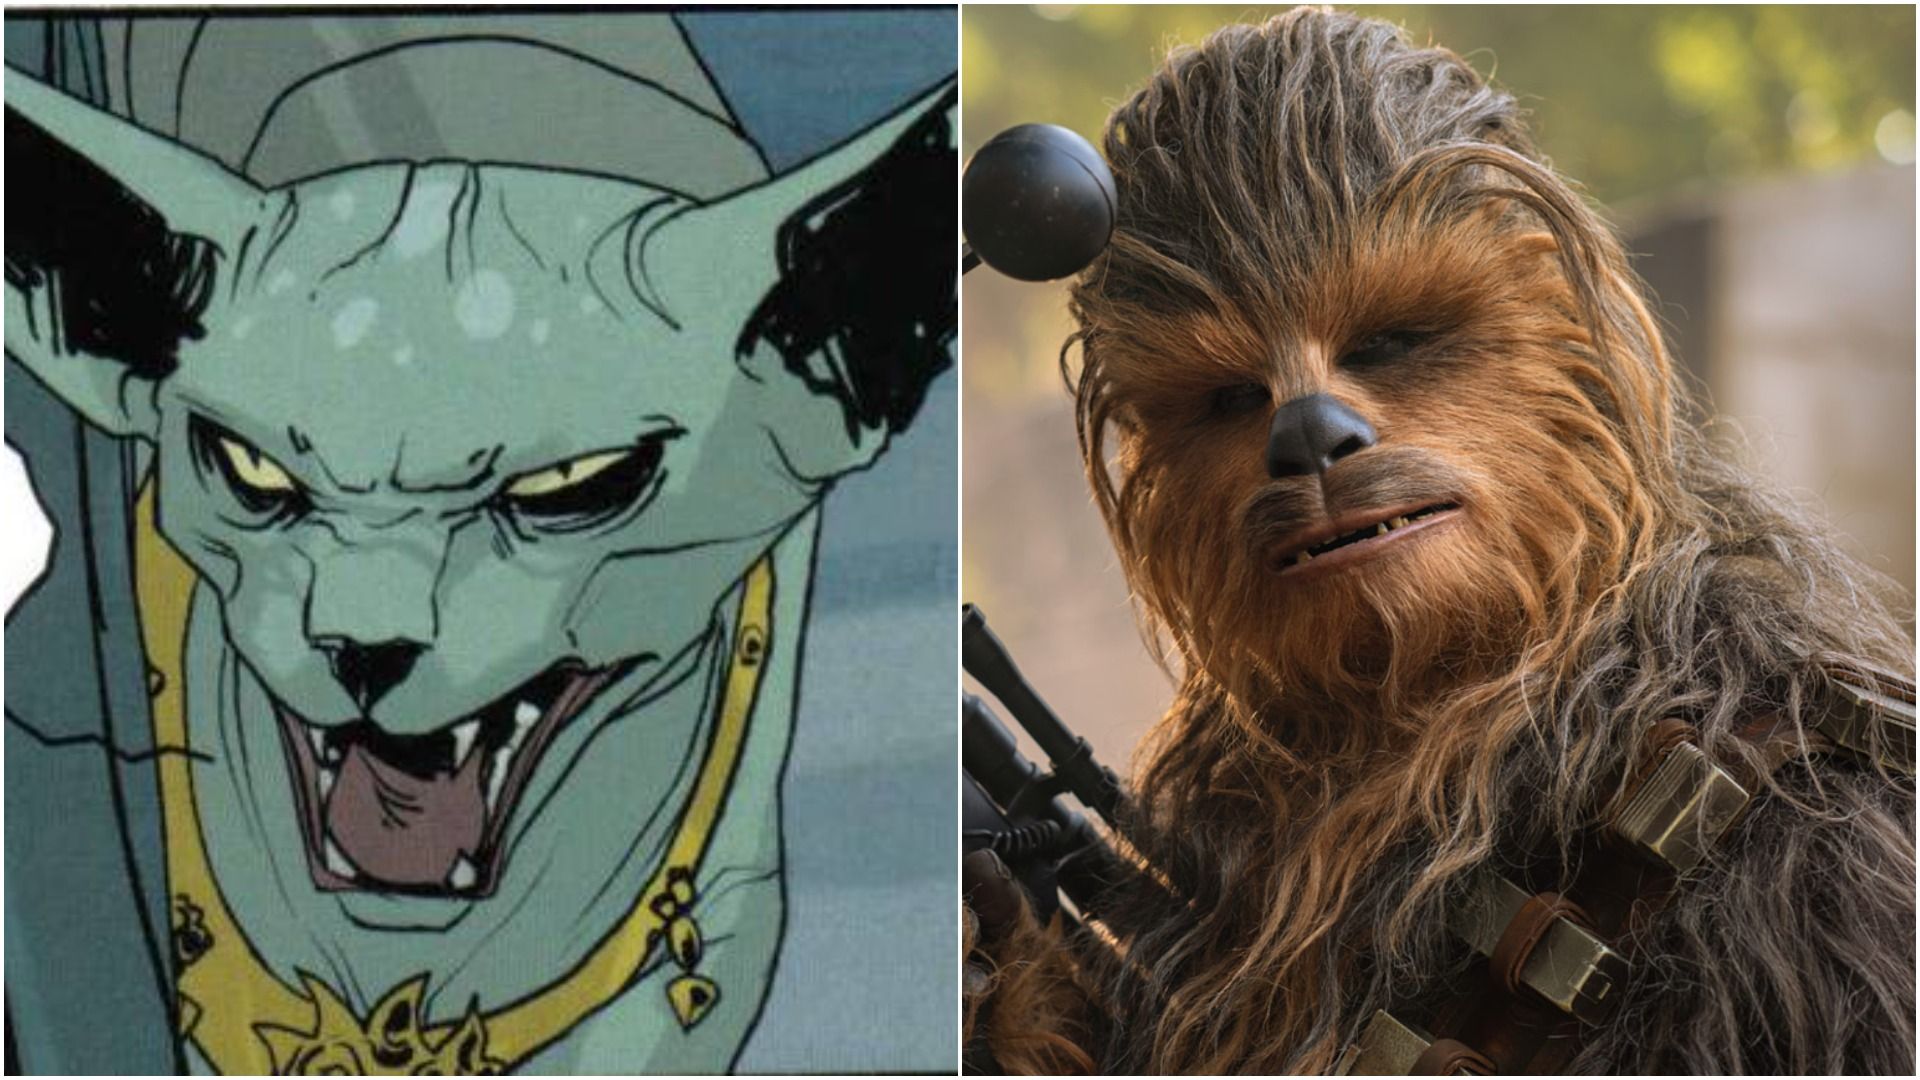 Split Image of Chewbacca and Lying Cat